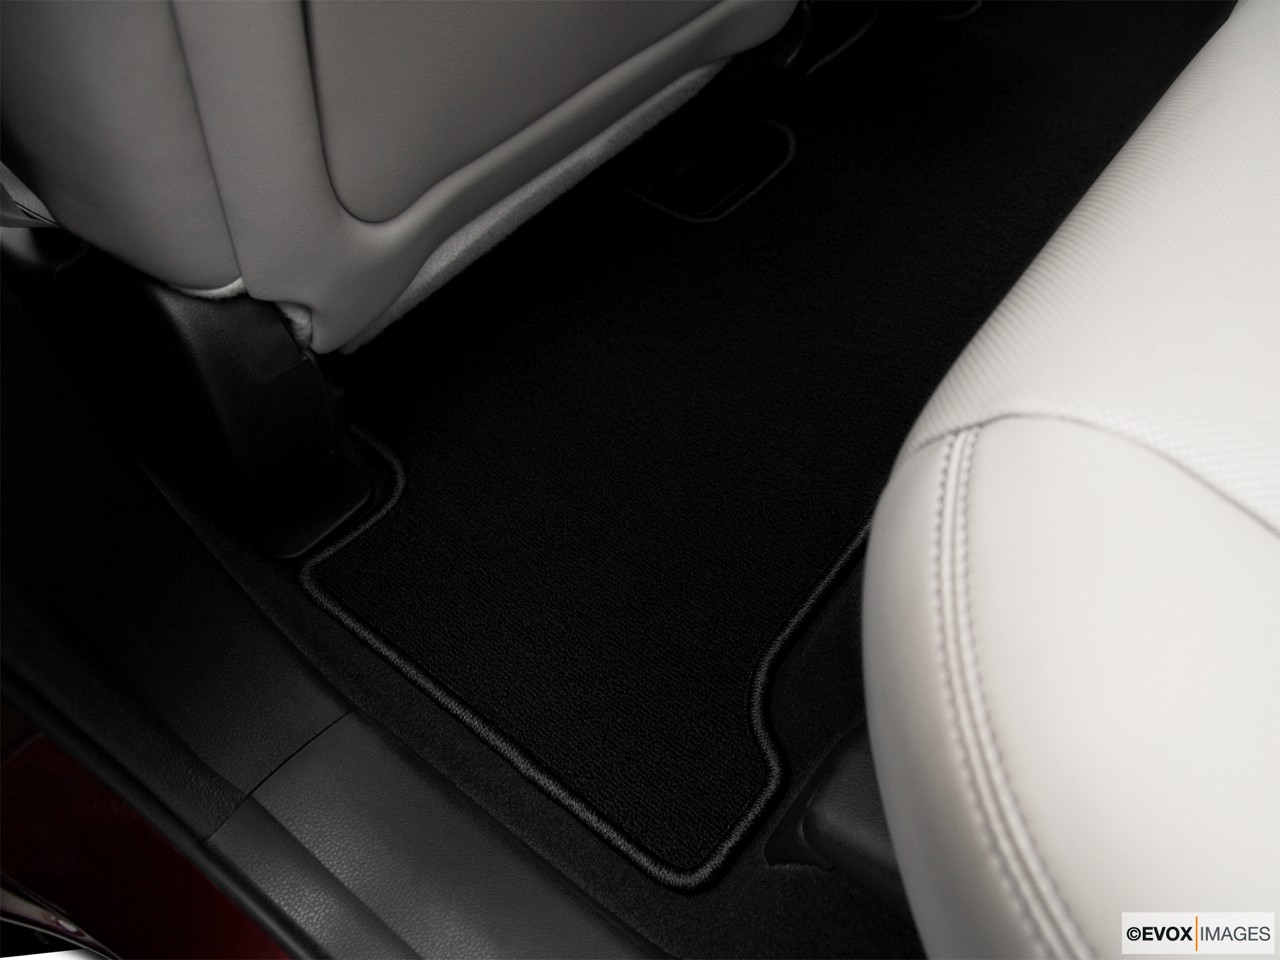 2010 Acura MDX MDX Rear driver's side floor mat. Mid-seat level from outside looking in. 